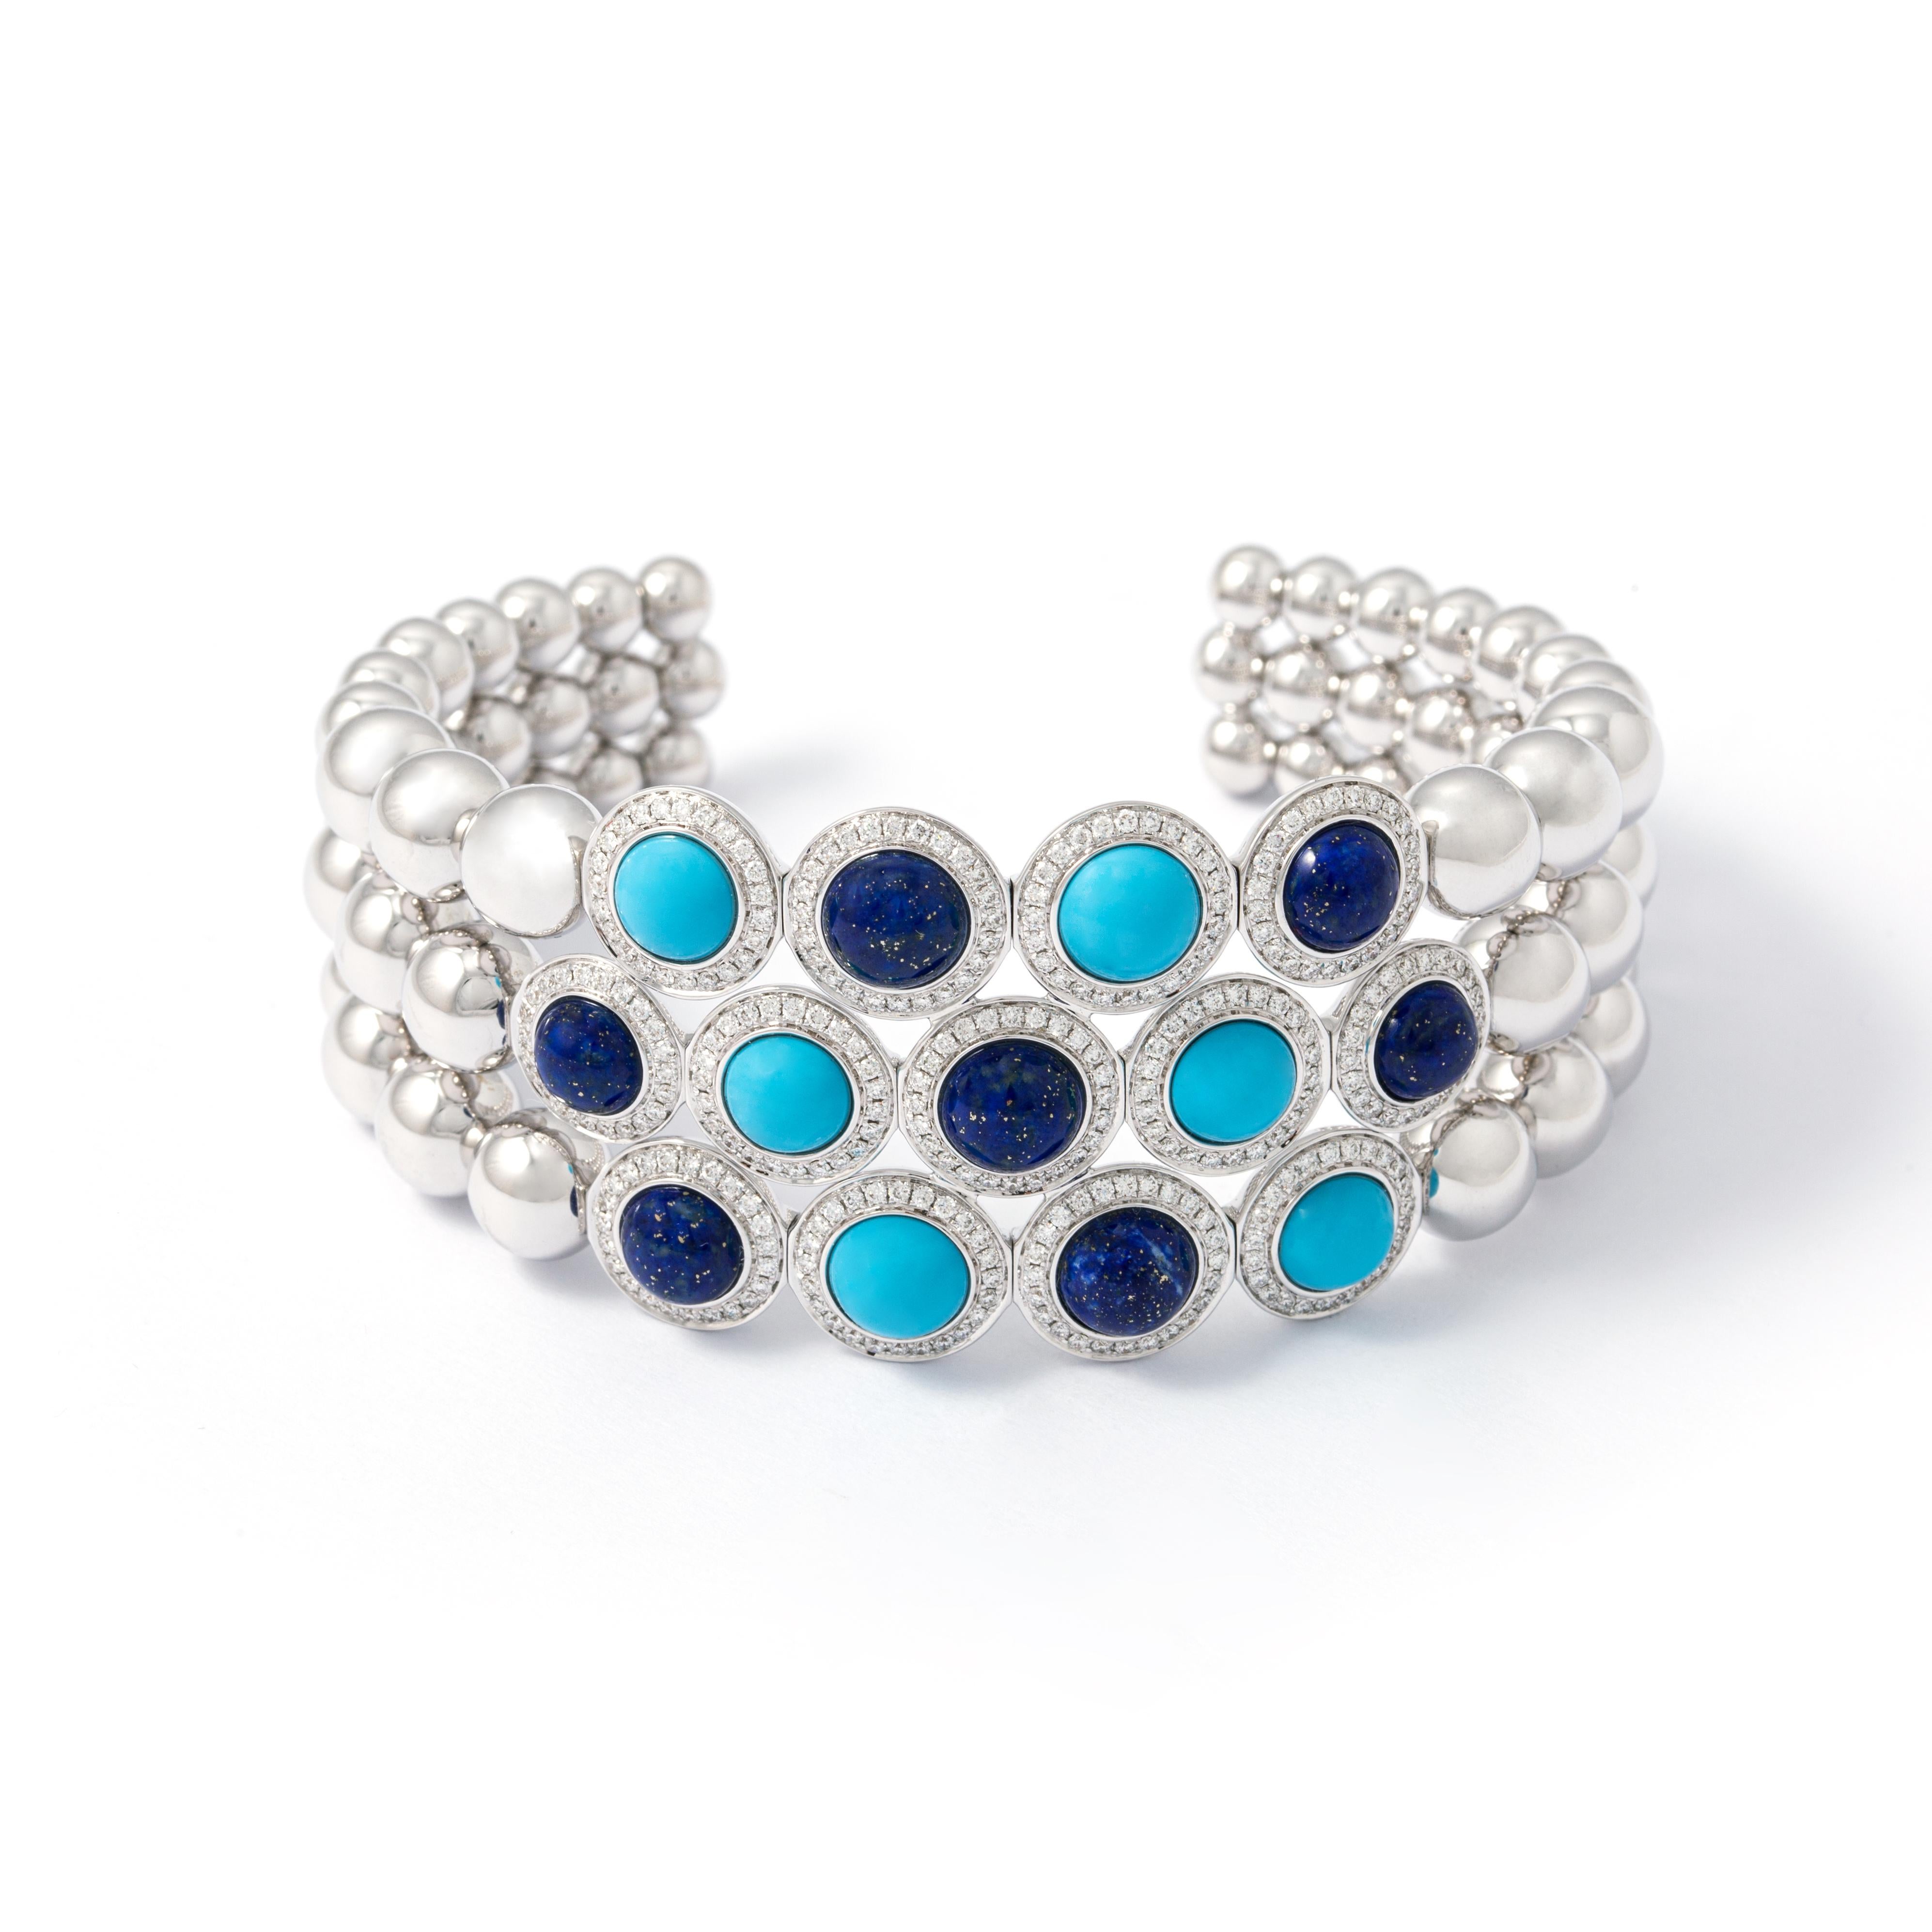 Bangle in 18kt white gold set with 302 diamonds 1.49 cts, 7 lapis lazuli 8.00 cts and 6 turquoises 5.01 cts       

Inner circumference: Approximately 16.48  centimeters (6.48 inches) up to 17.50 centimeters (6.89 inches). 

Note: Flexible